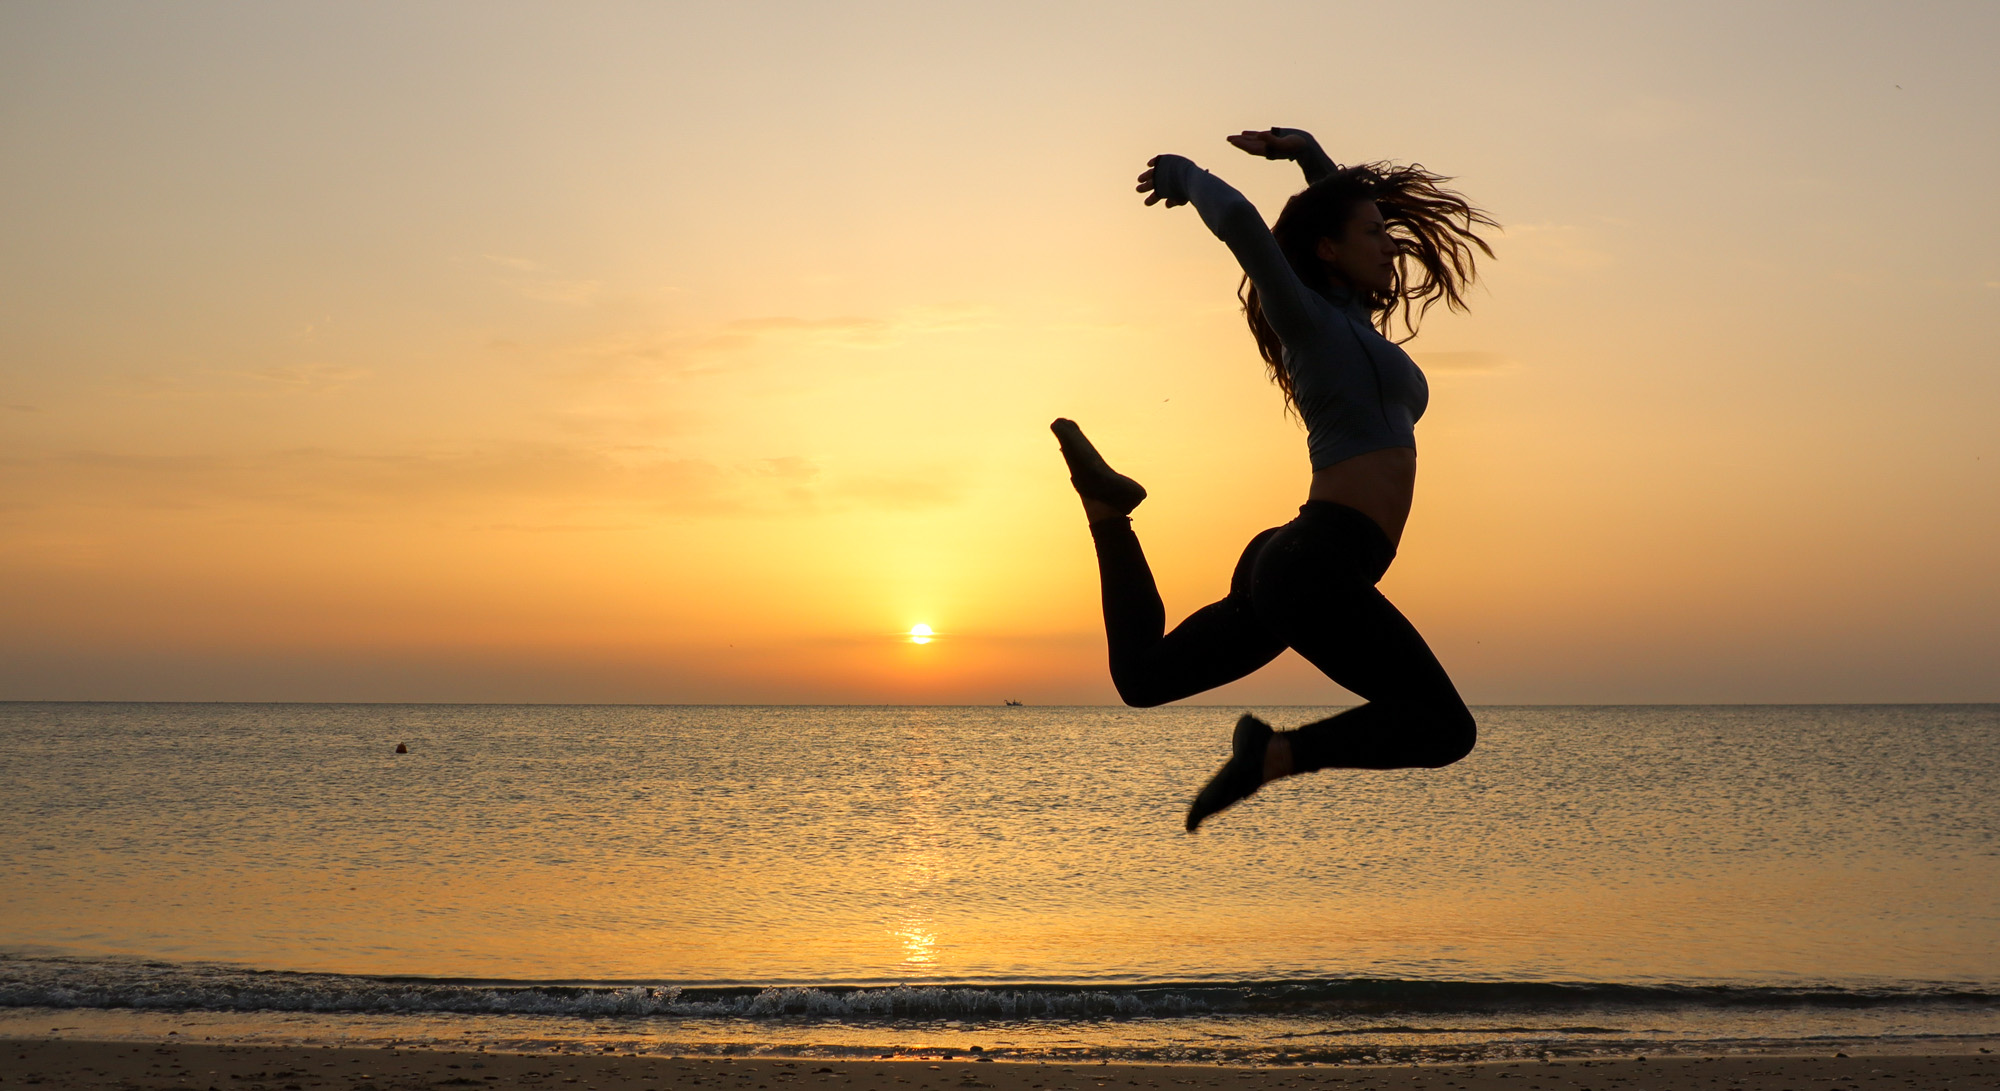 woman alone at dawn on beach with sunrise doing a jump